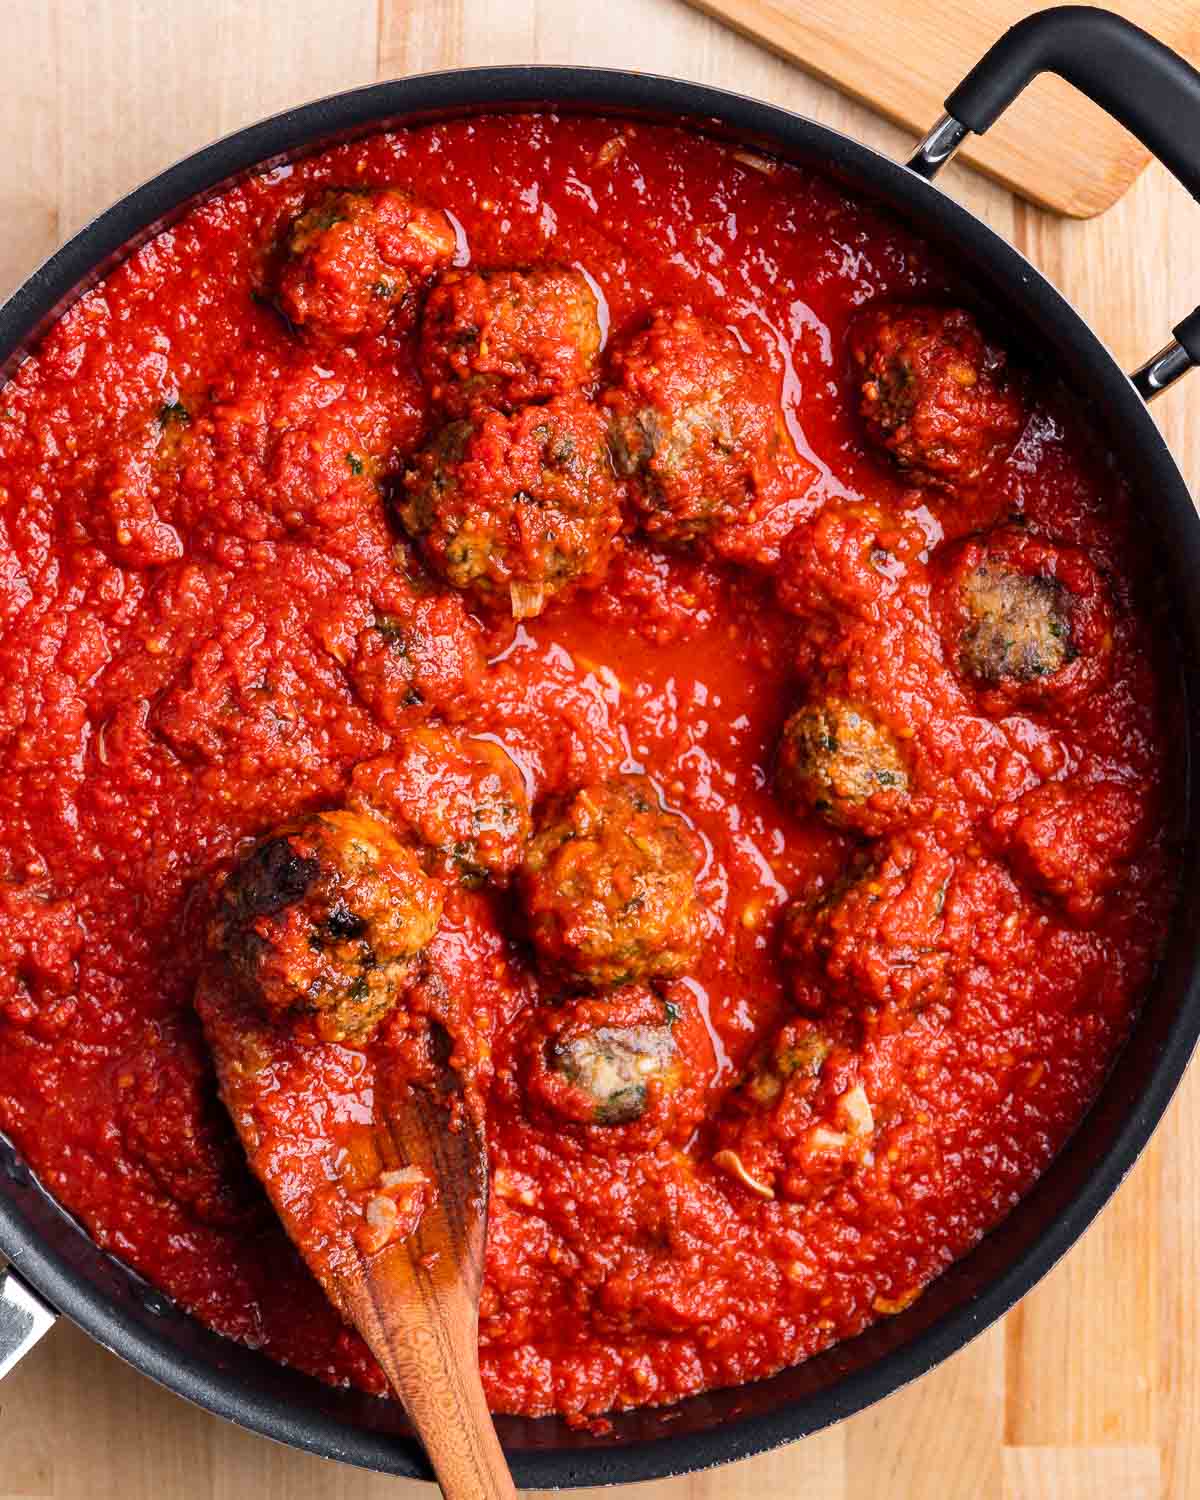 Large pan with meatballs in sauce.